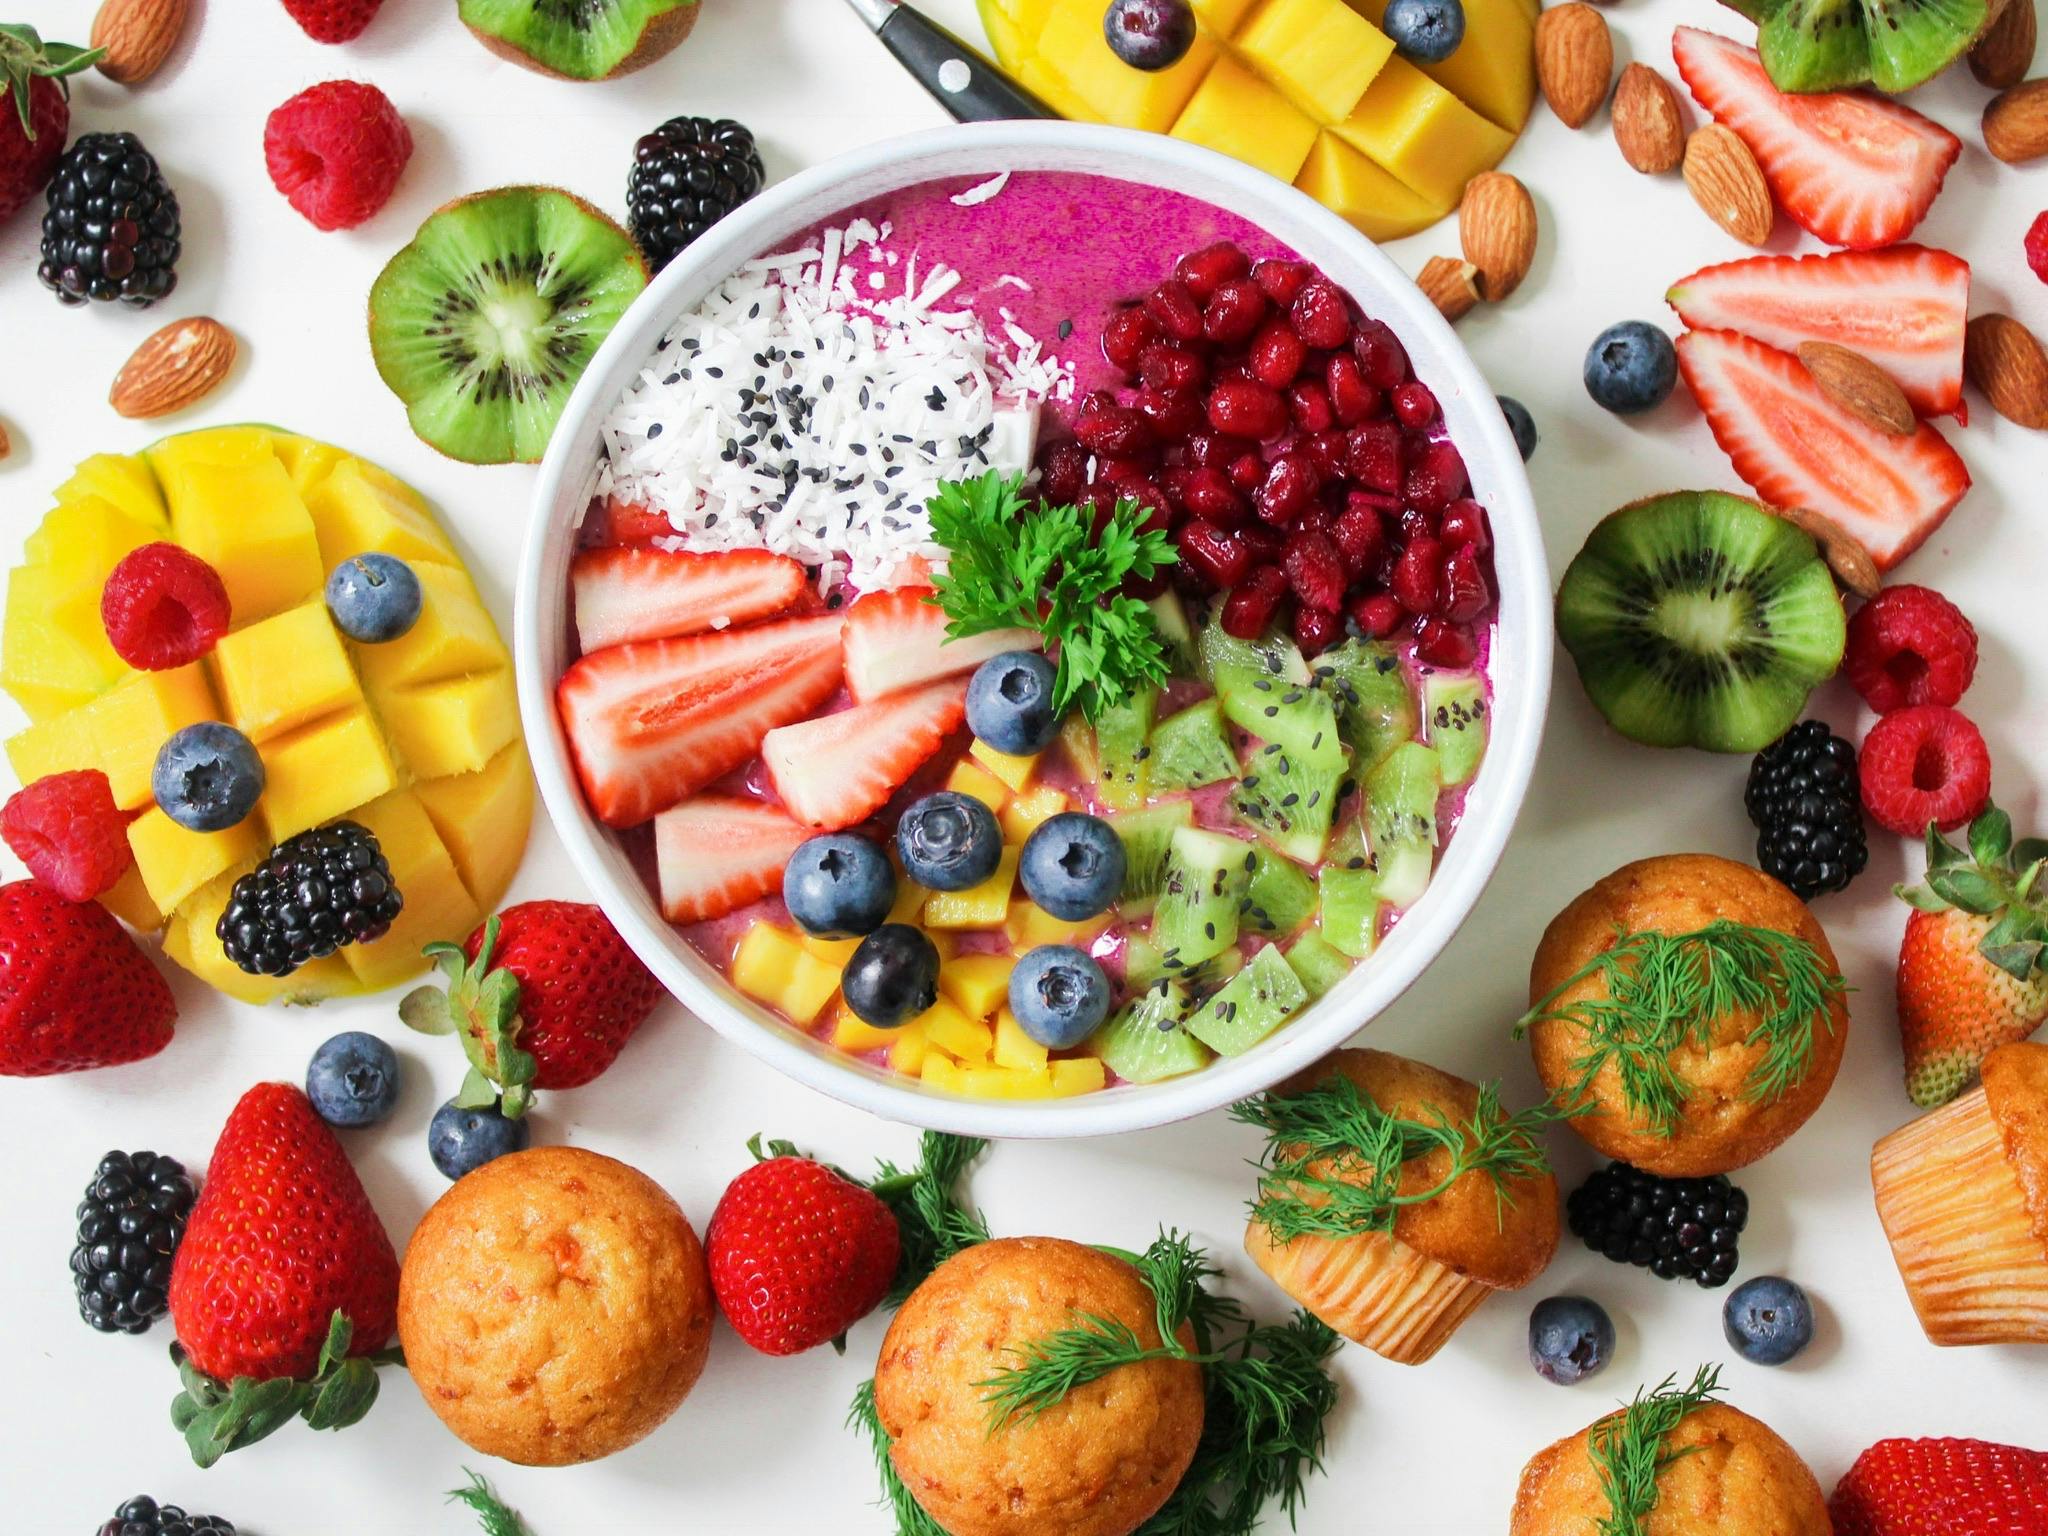 Colorful fruits and muffins spread out on a white table viewed from above